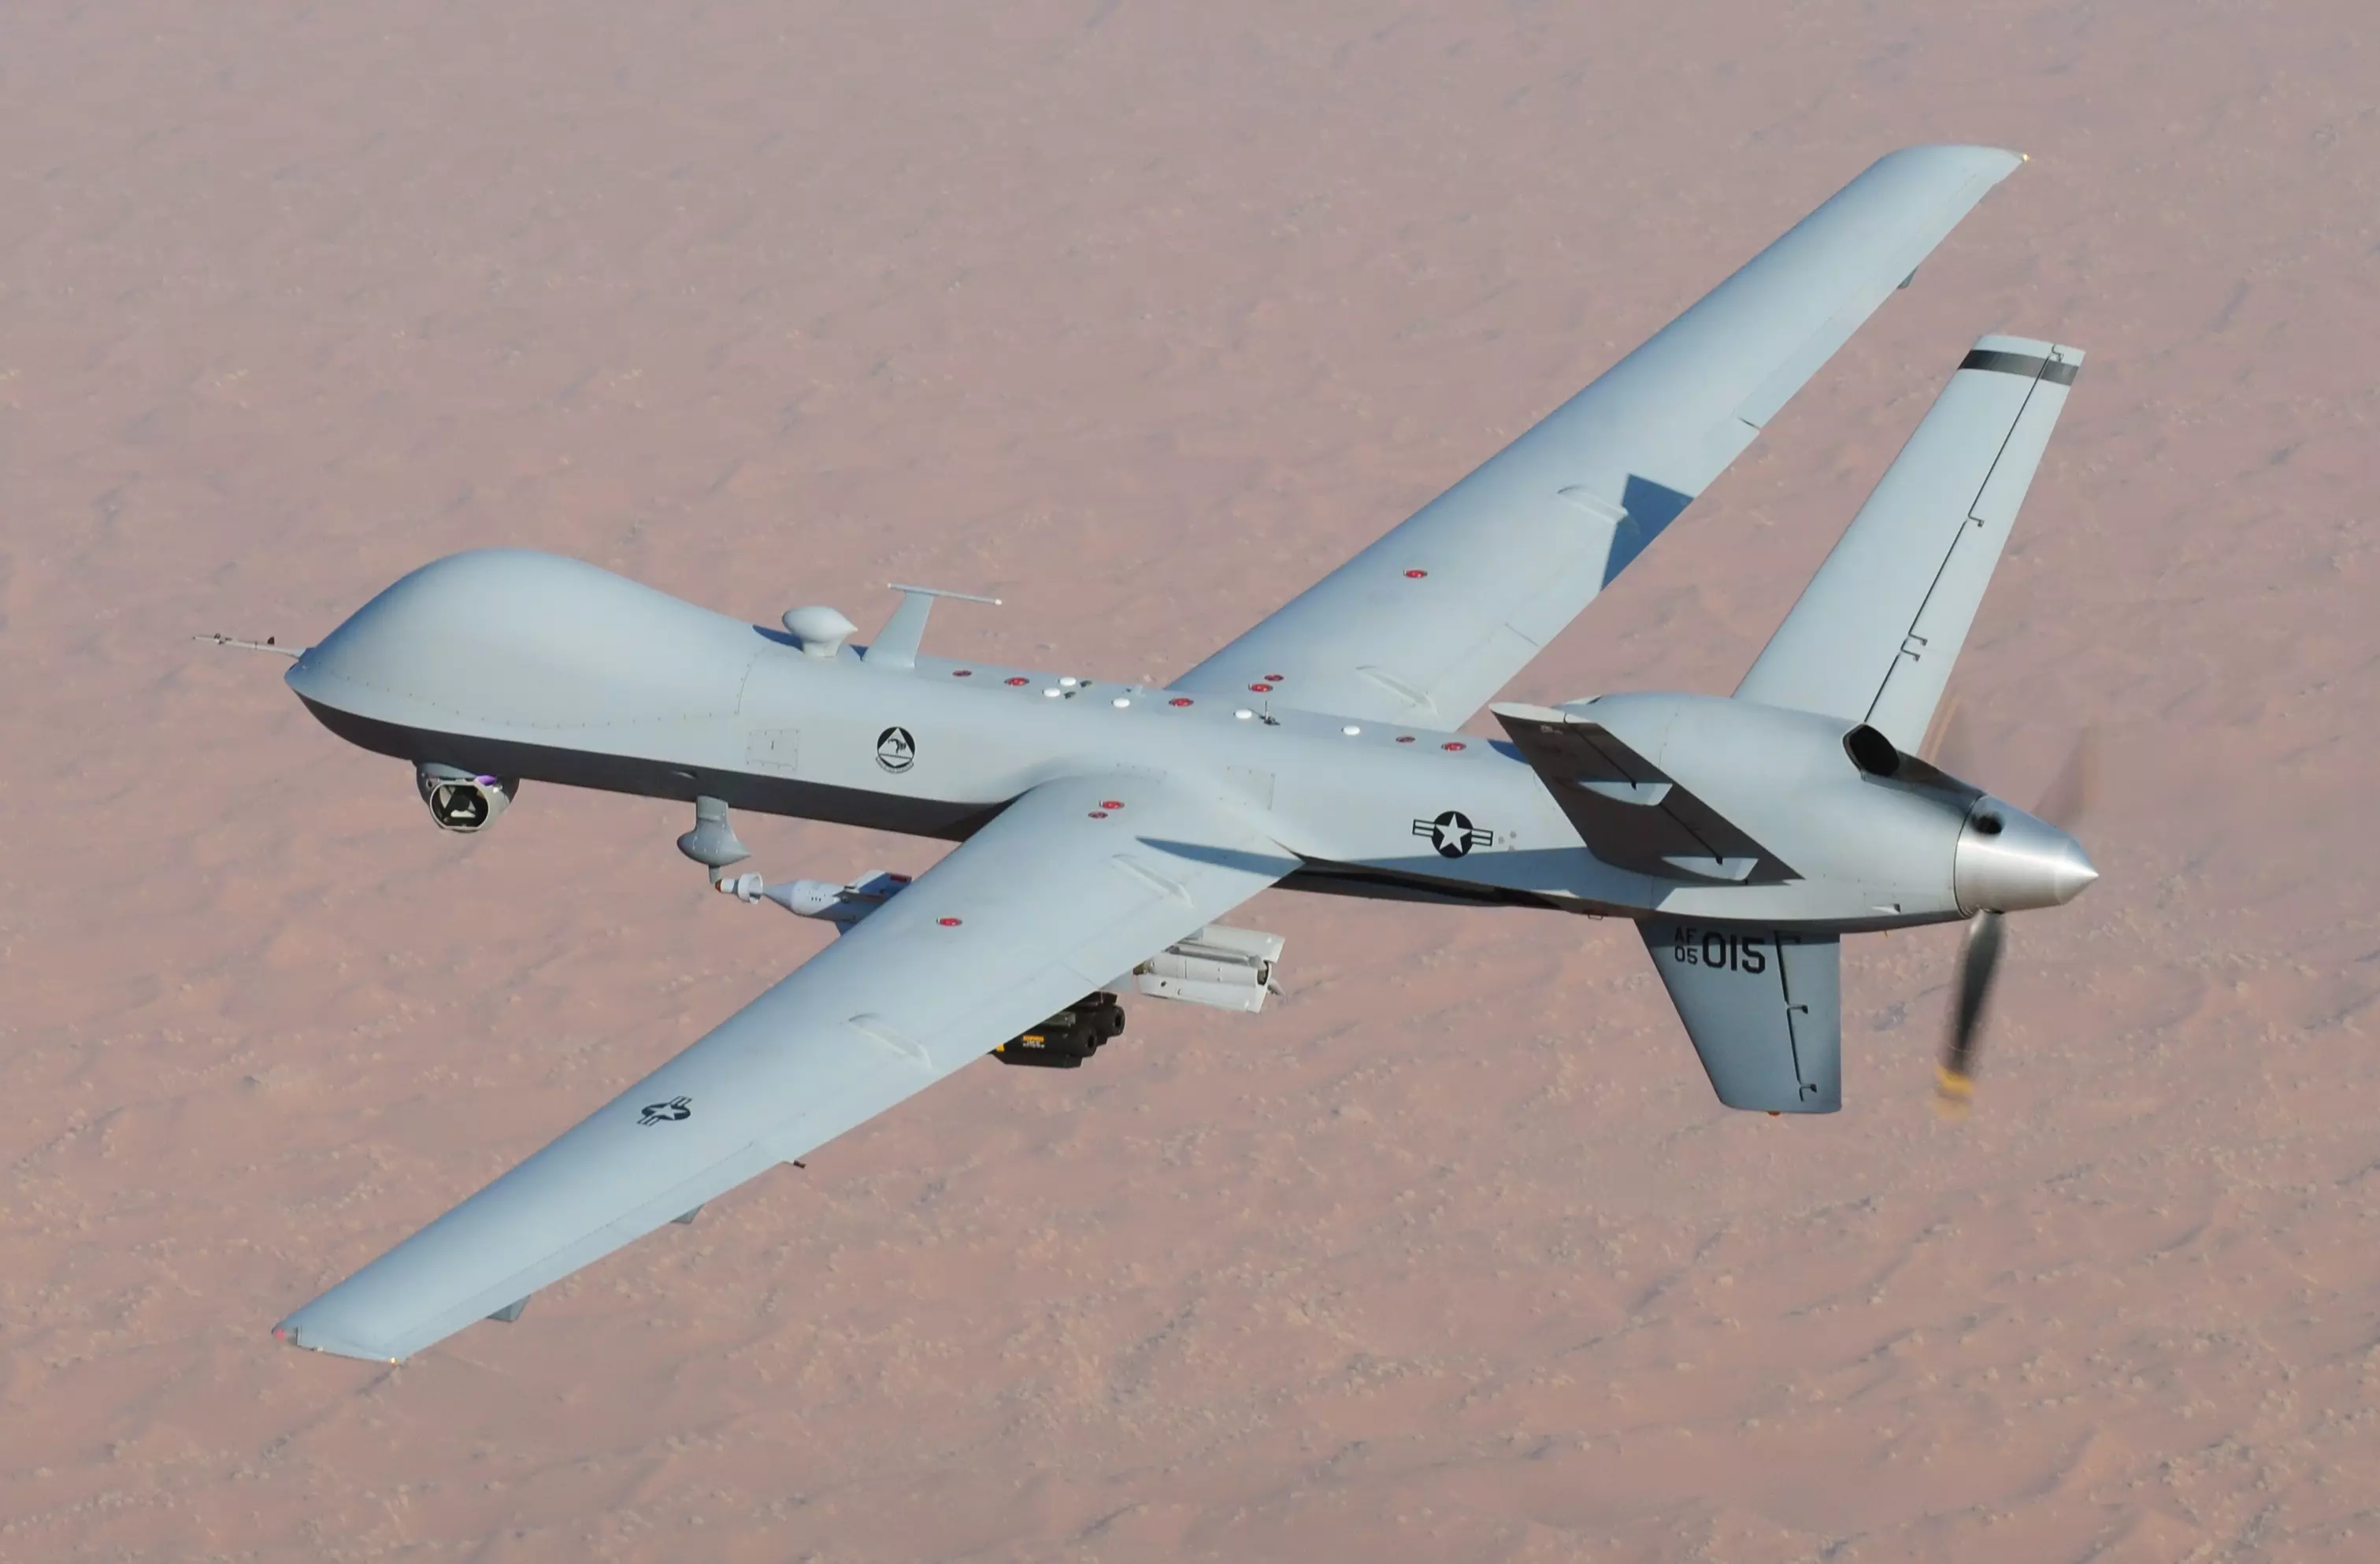 US approves sale of 31 MQ-9B armed drones to India